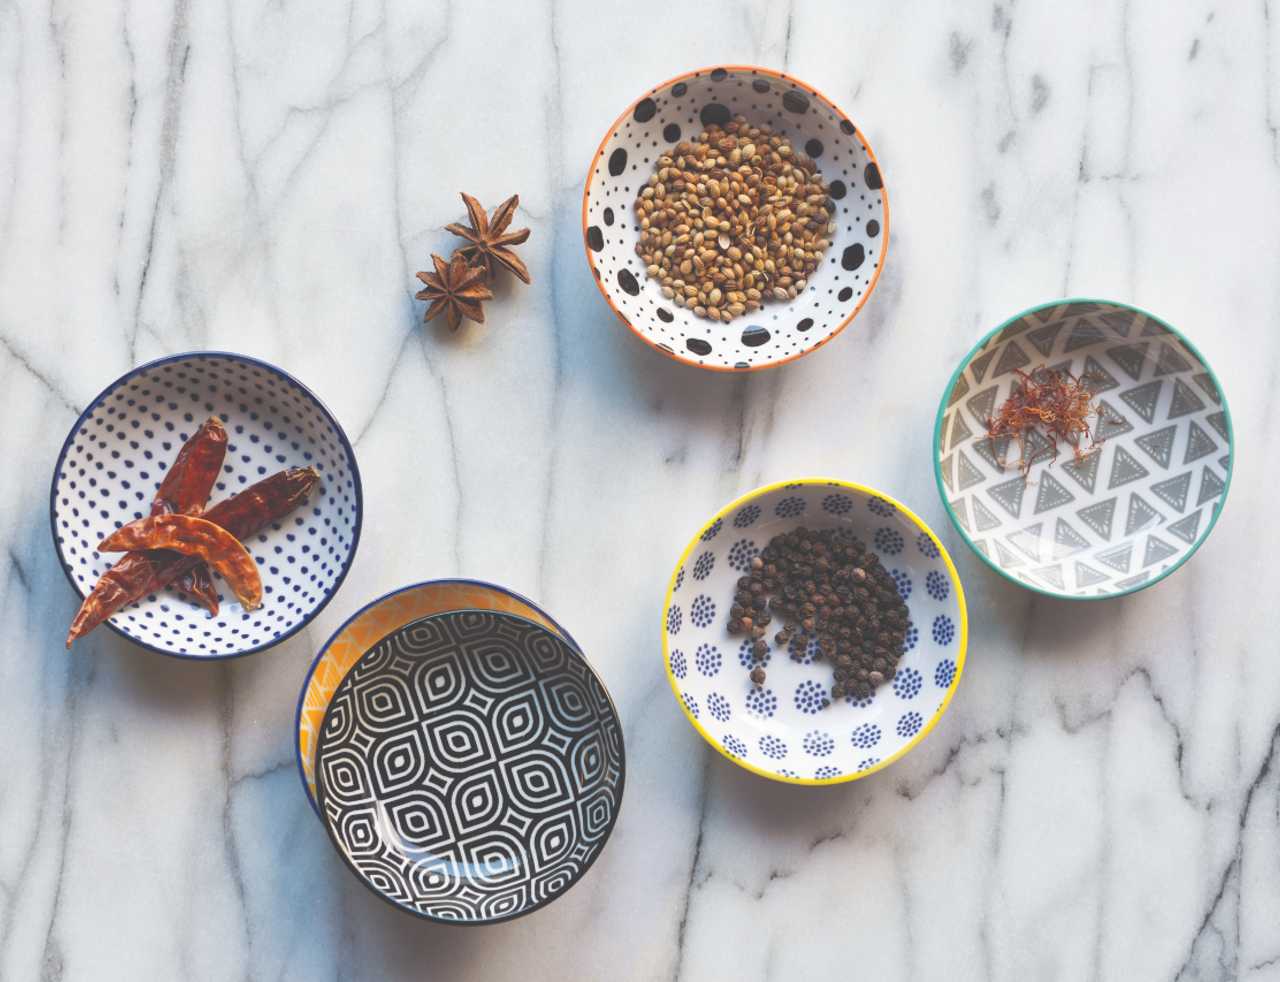 The Now Designs Bits and Dots pinch bowls with seed and peppers